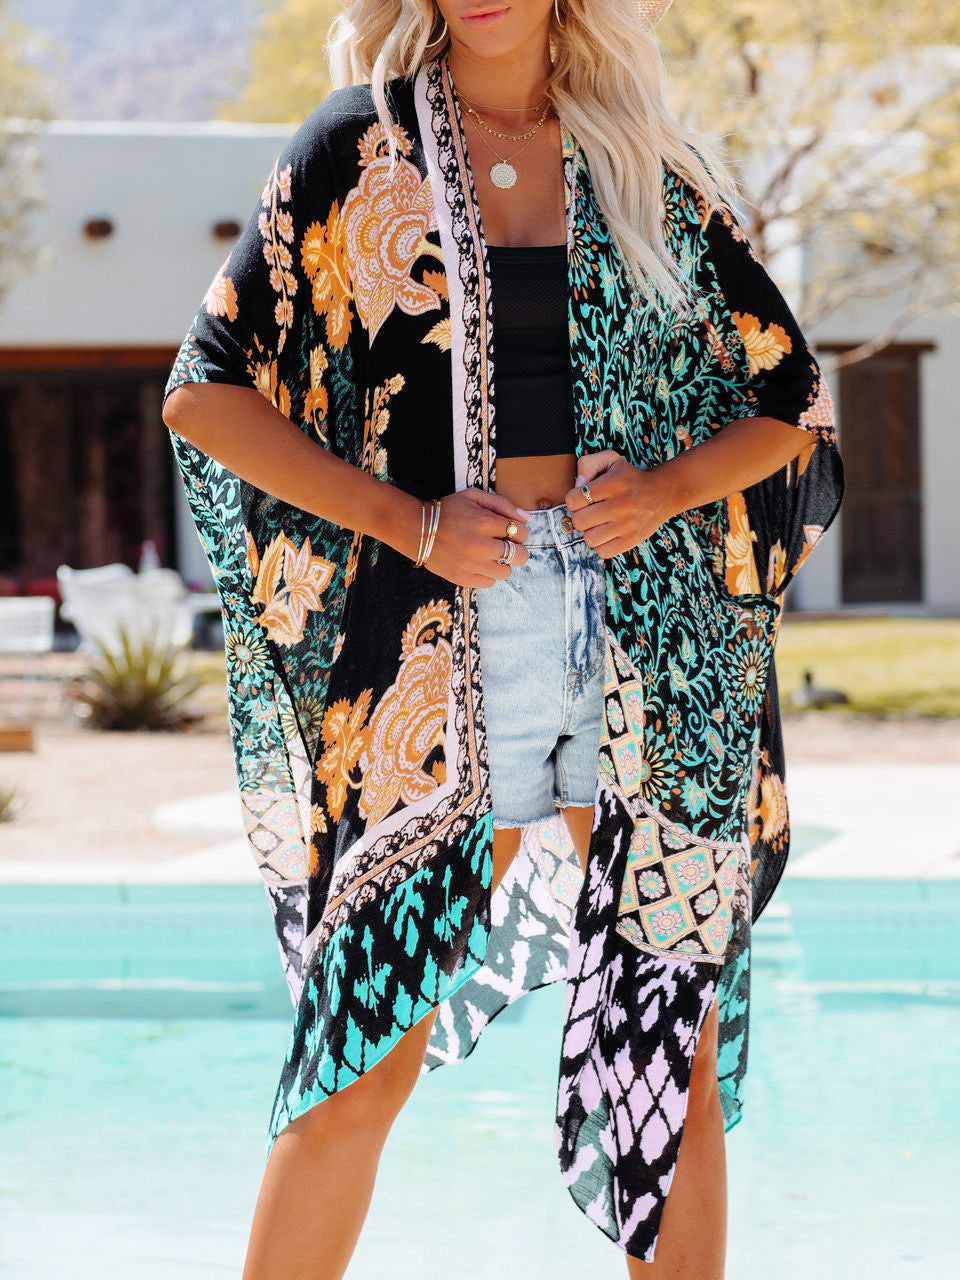 A vibrant woman wearing a Beachy Cover Ups Tropical Beach Cardigan Cover Up standing by a tropical pool.